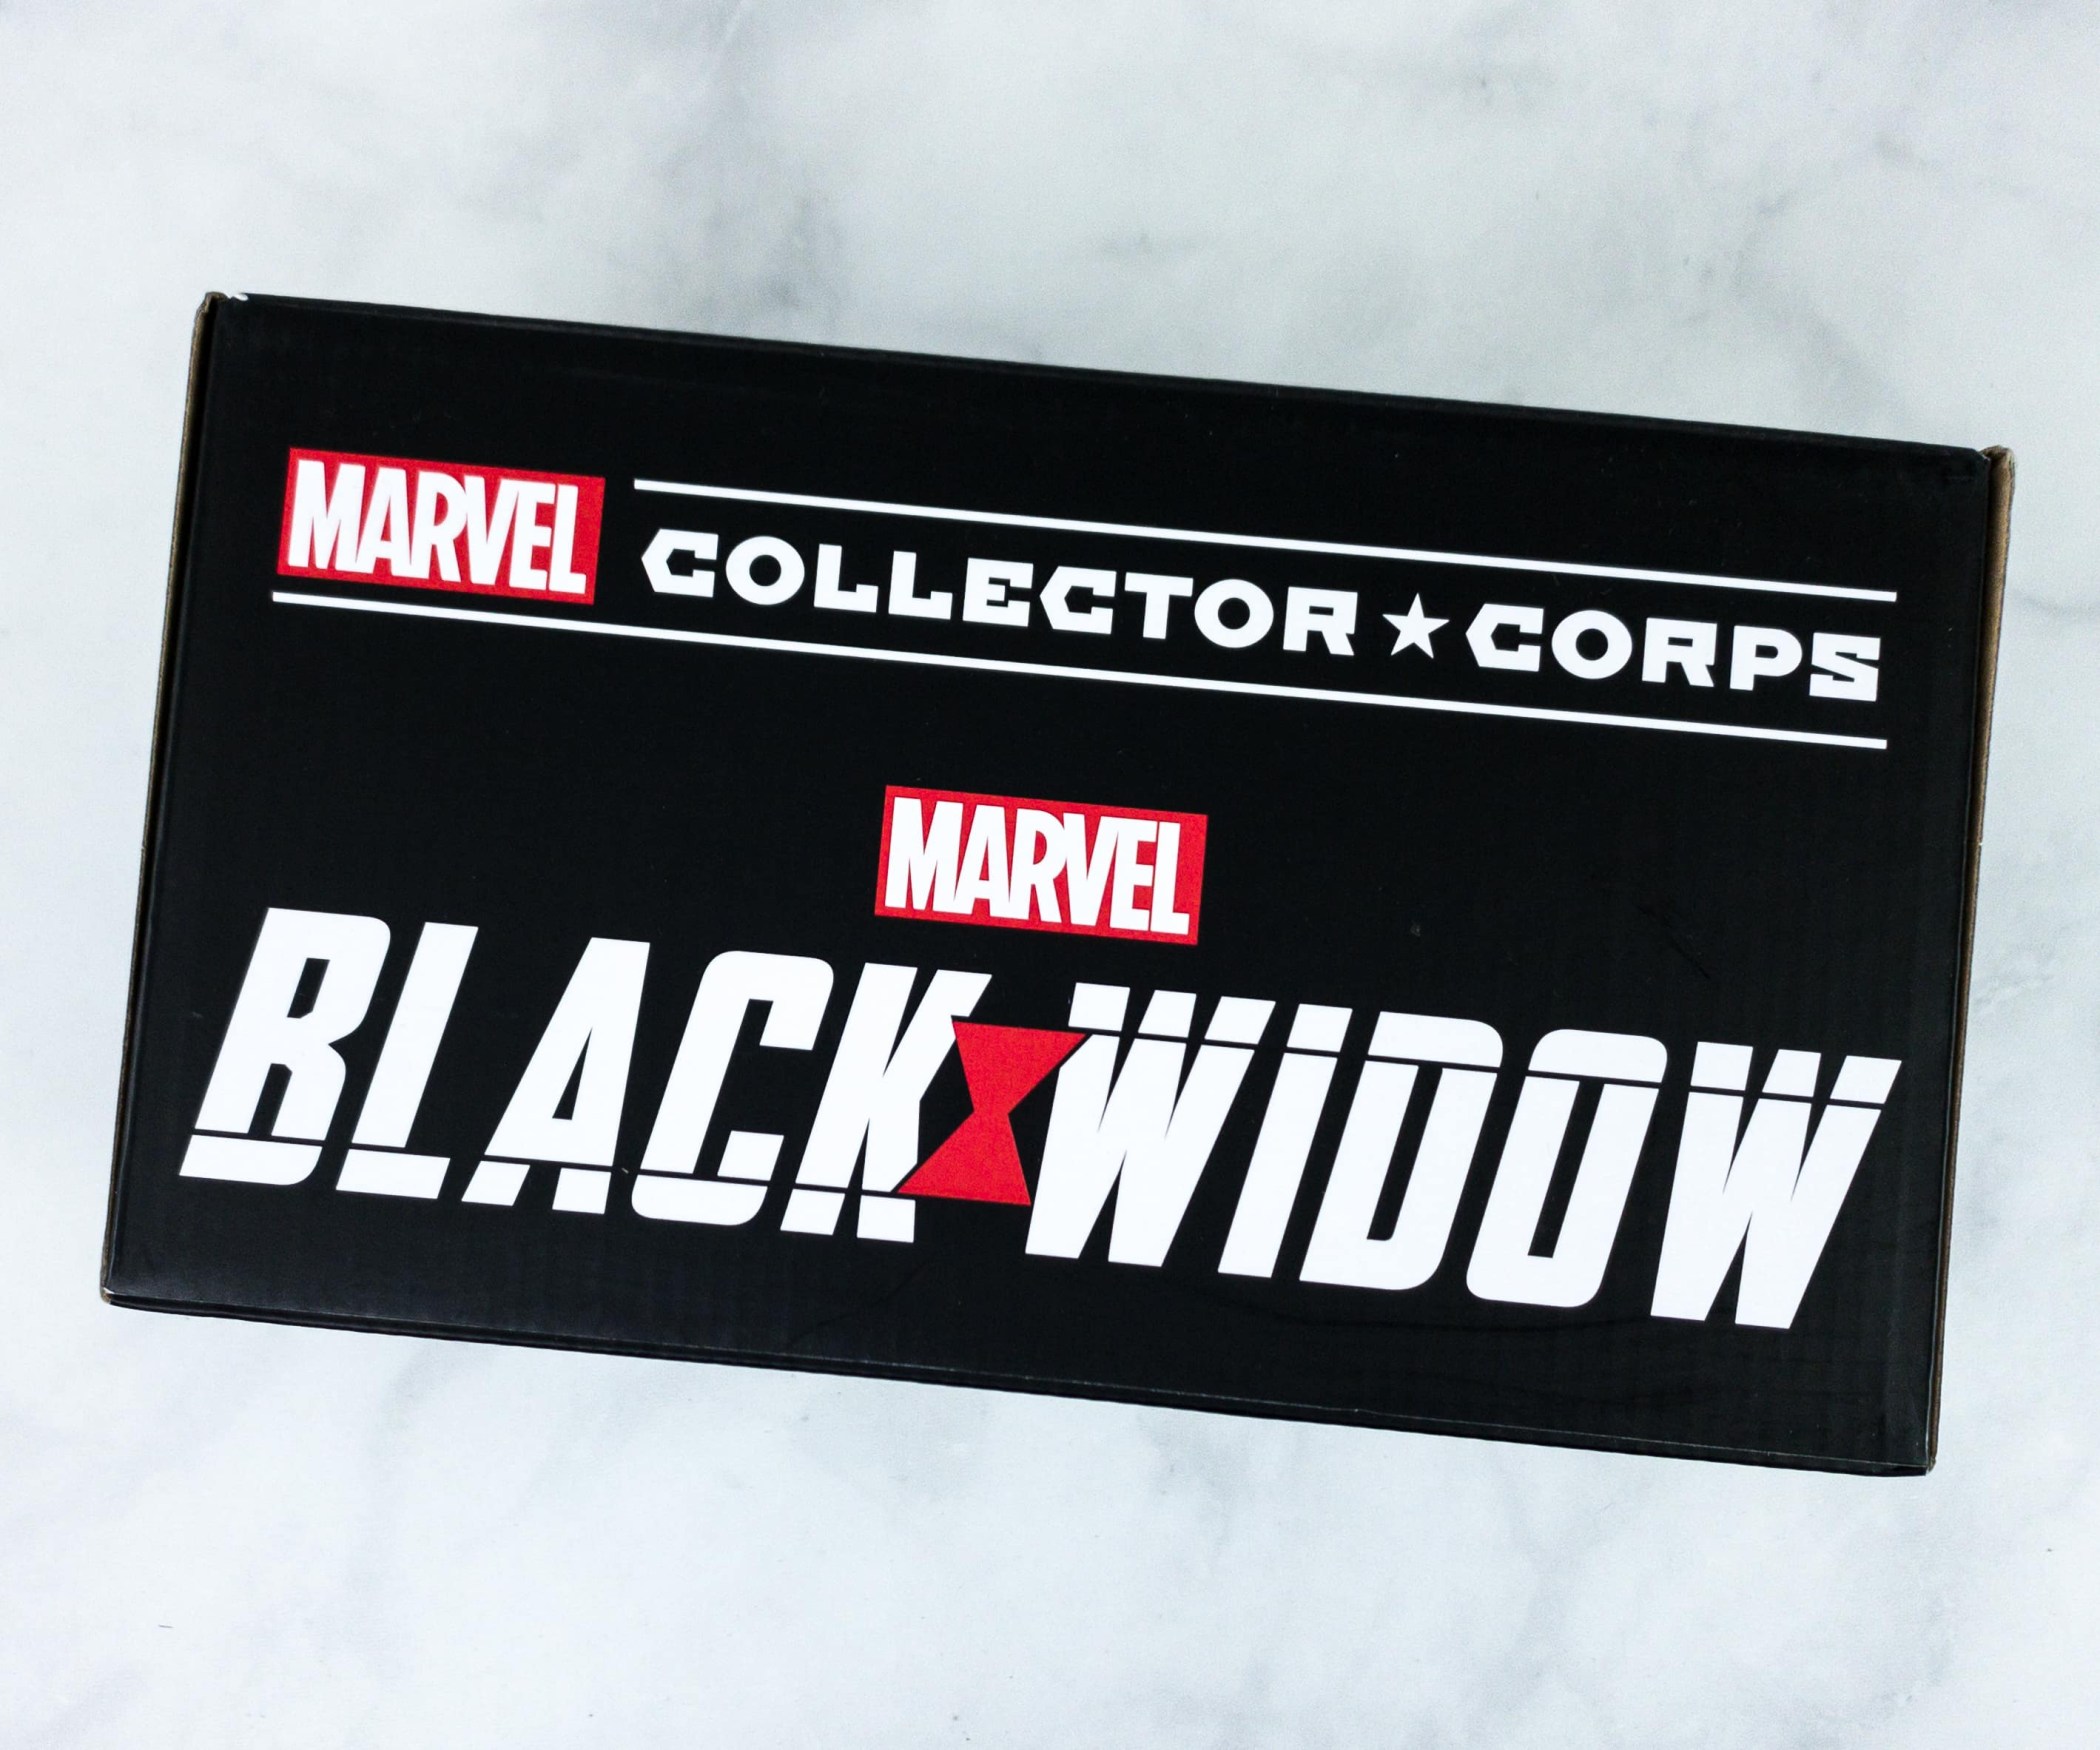 Marvel Collector Corps May 2020 Subscription Box Review - BLACK WIDOW ...